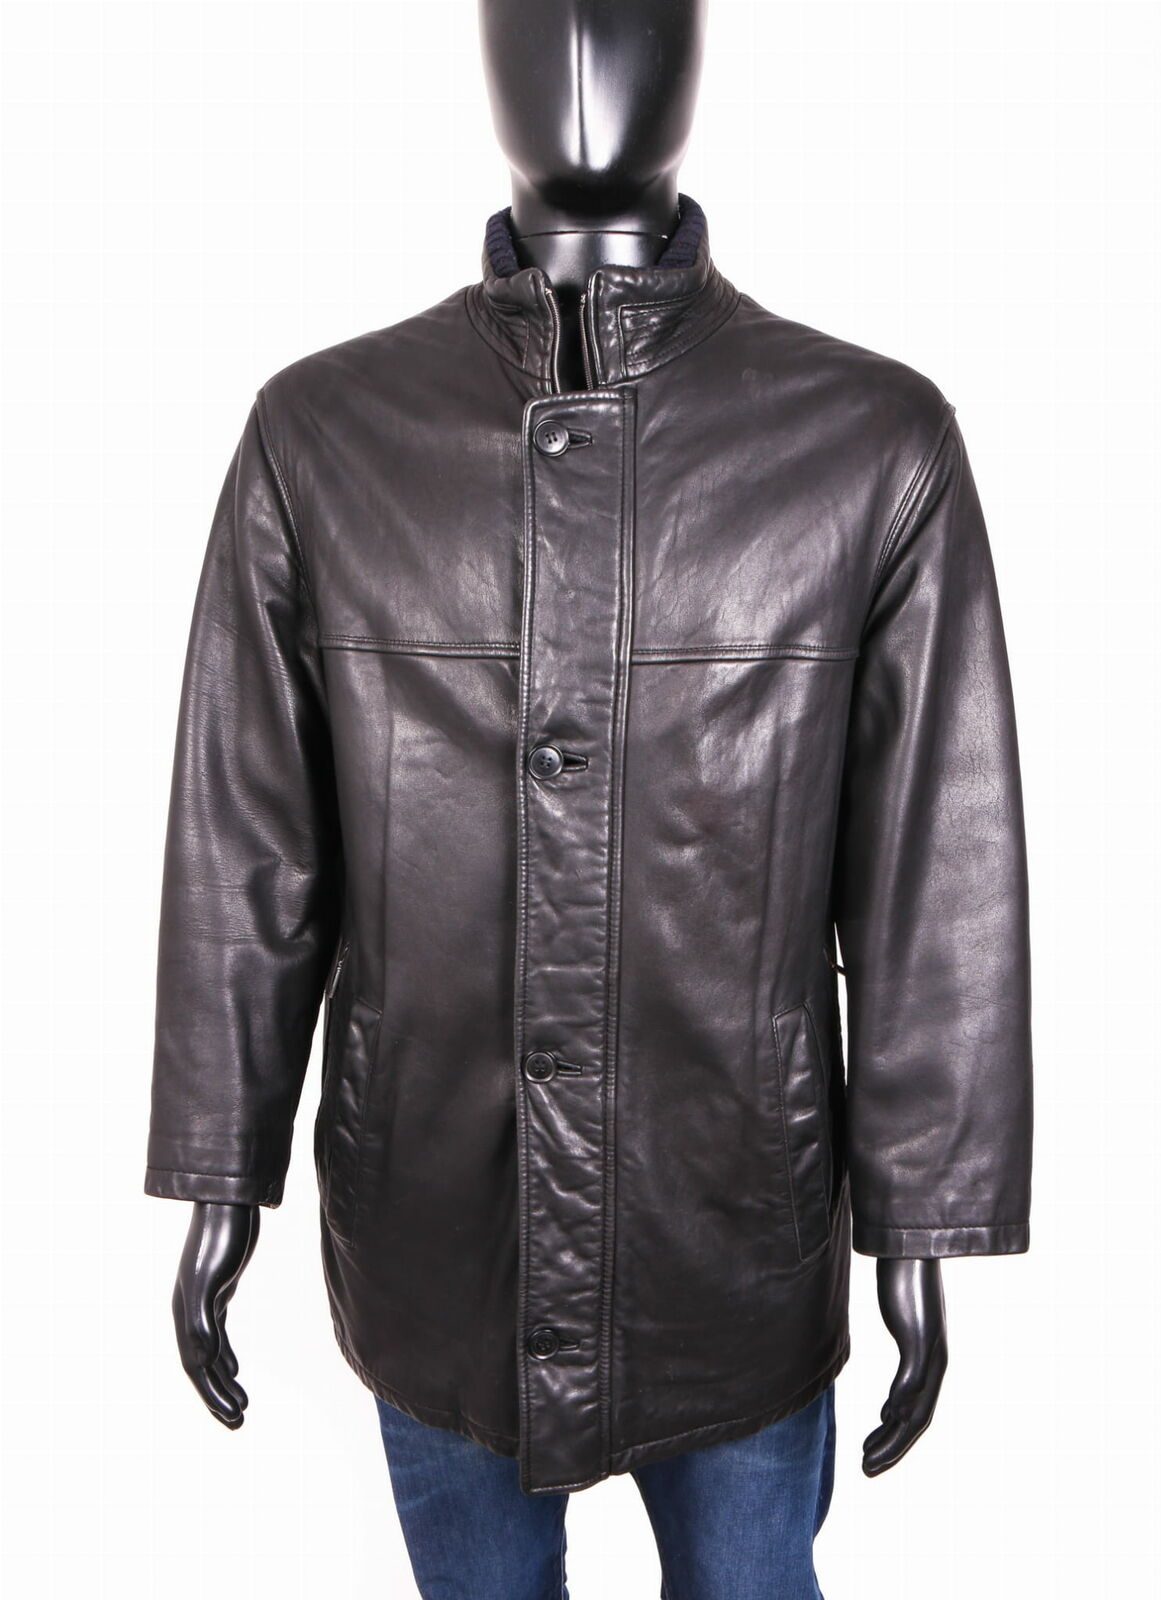 Pierre Cardin Classic Leather Jacket - A2 Jackets